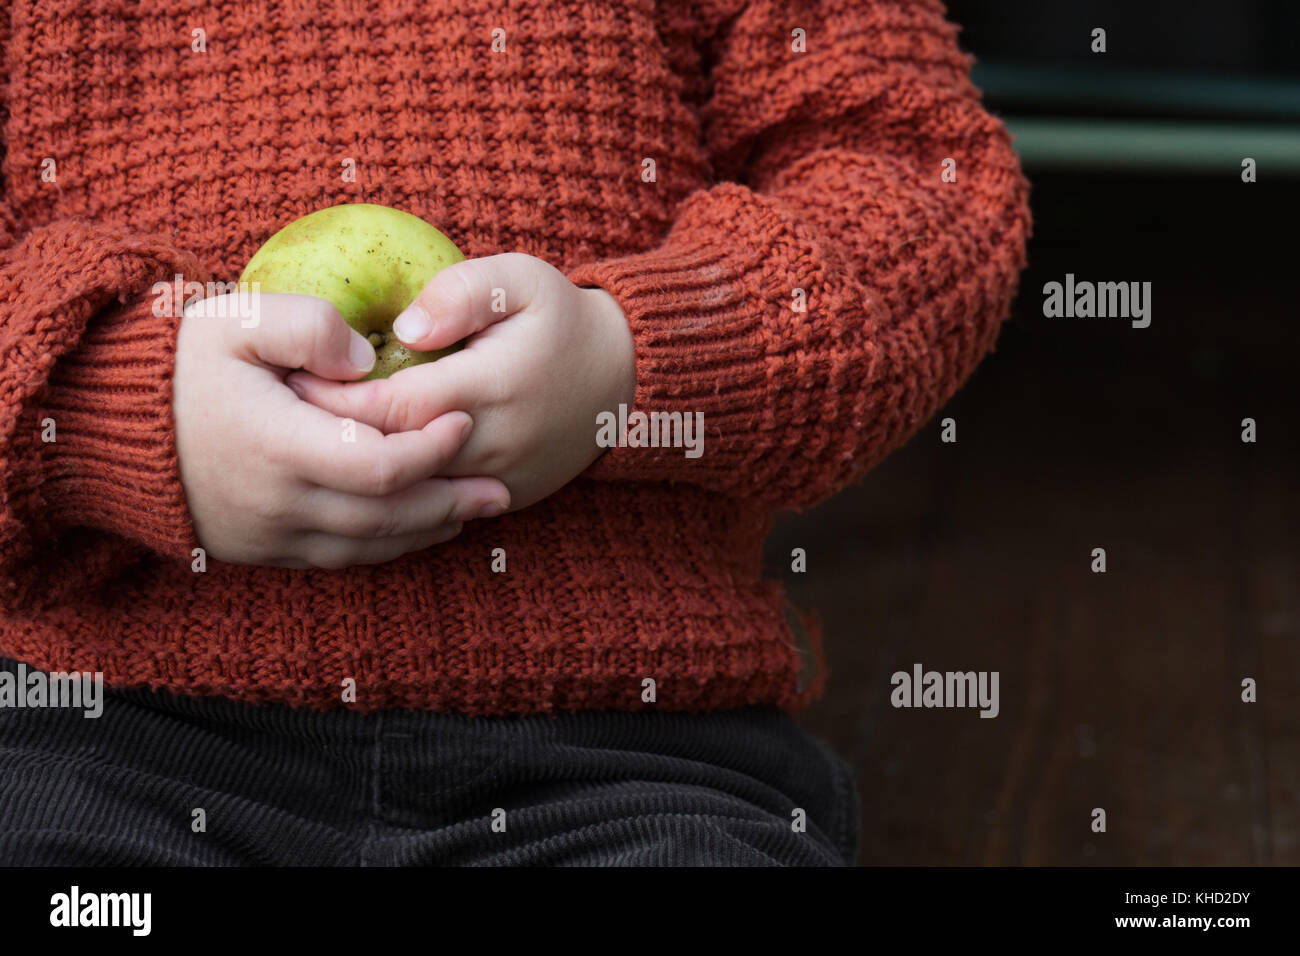 Boy holding green apple, mid section close up Stock Photo